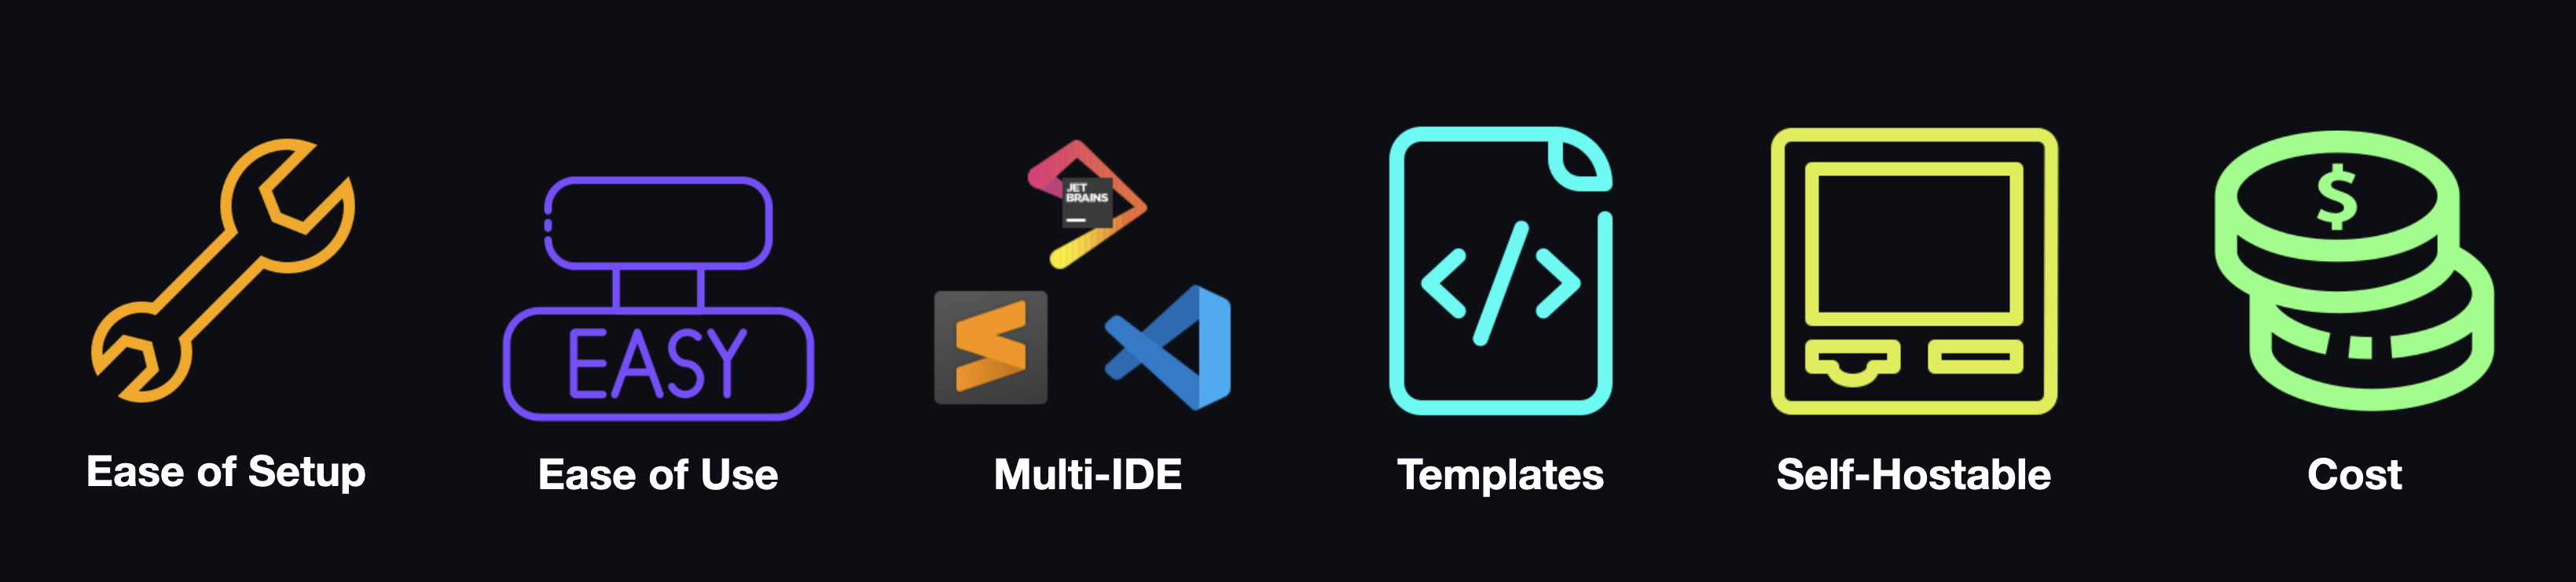 Various images representing ease of setup, ease of use, multi-IDE support, custom templates, the ability to self-host, and cost.